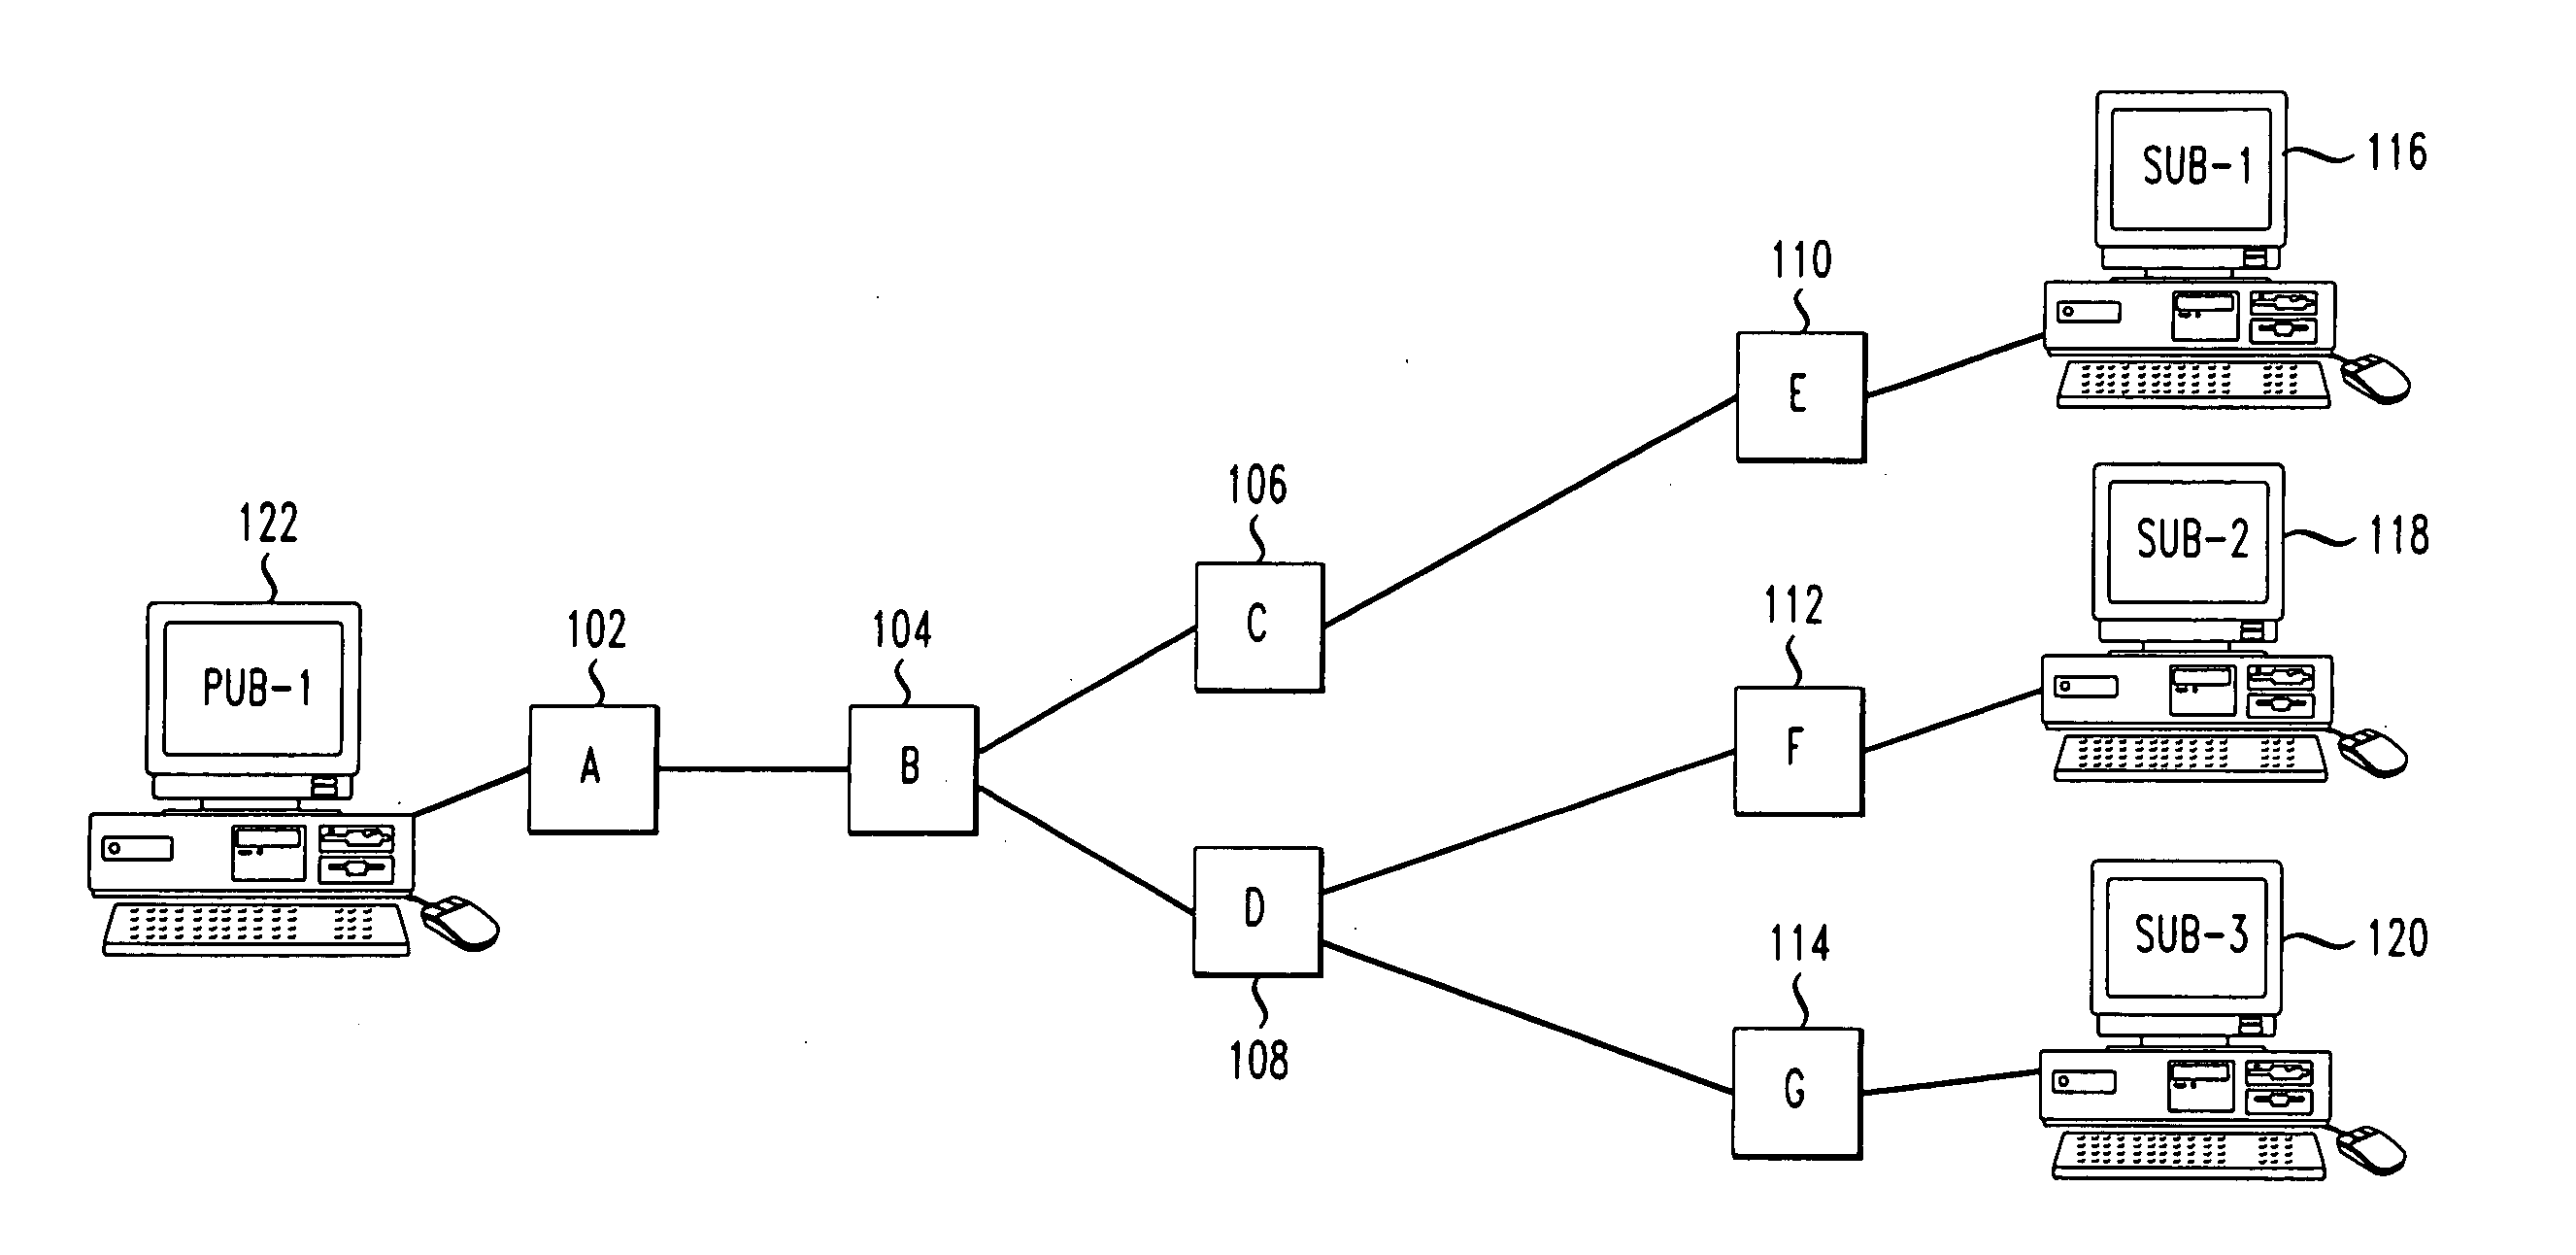 Content based data packet routing using labels